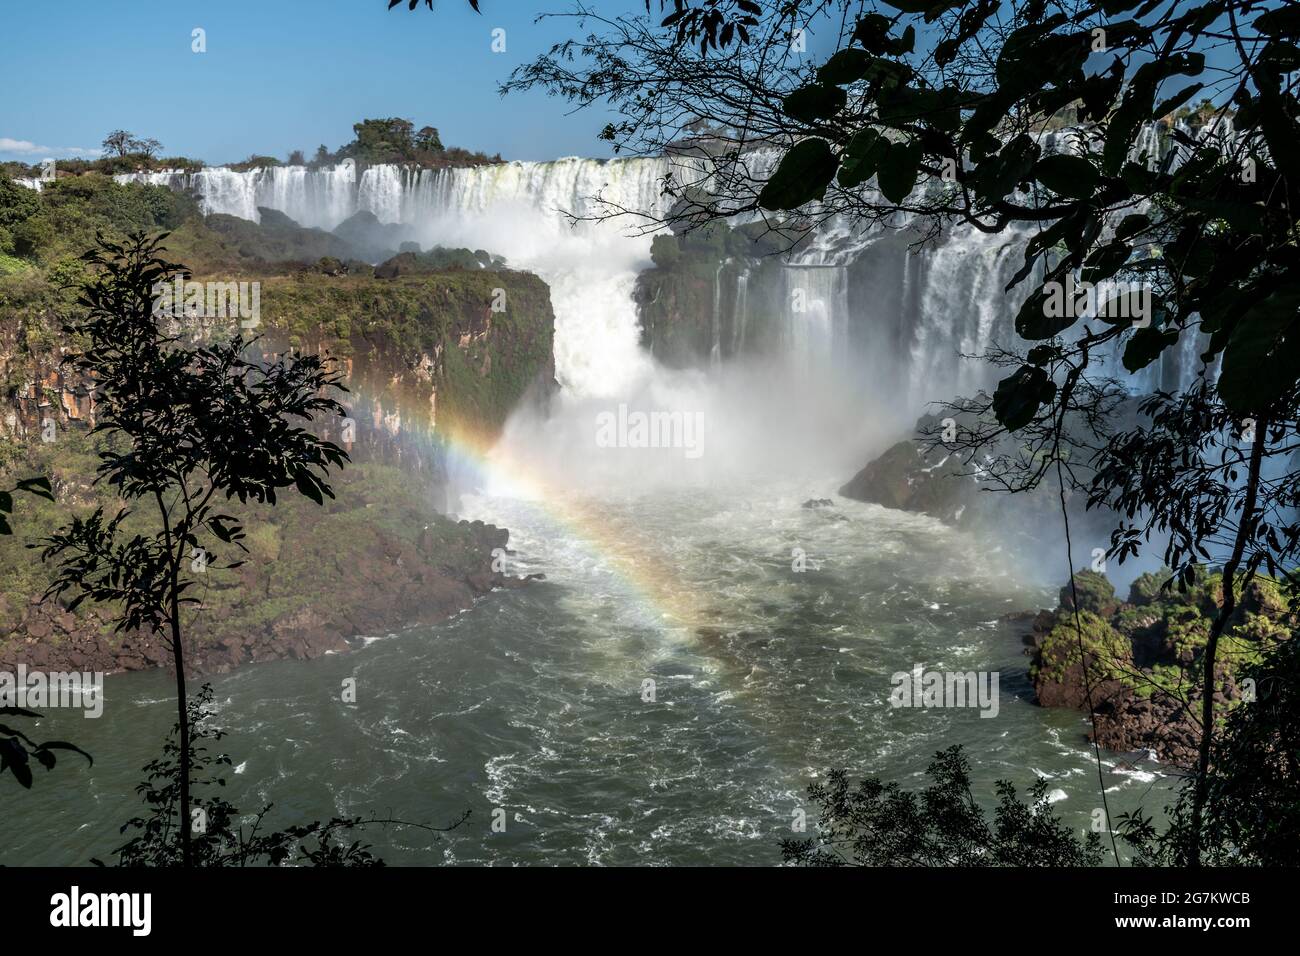 Scenic view of Iguazu Falls as seen from the Argentinian side Stock Photo